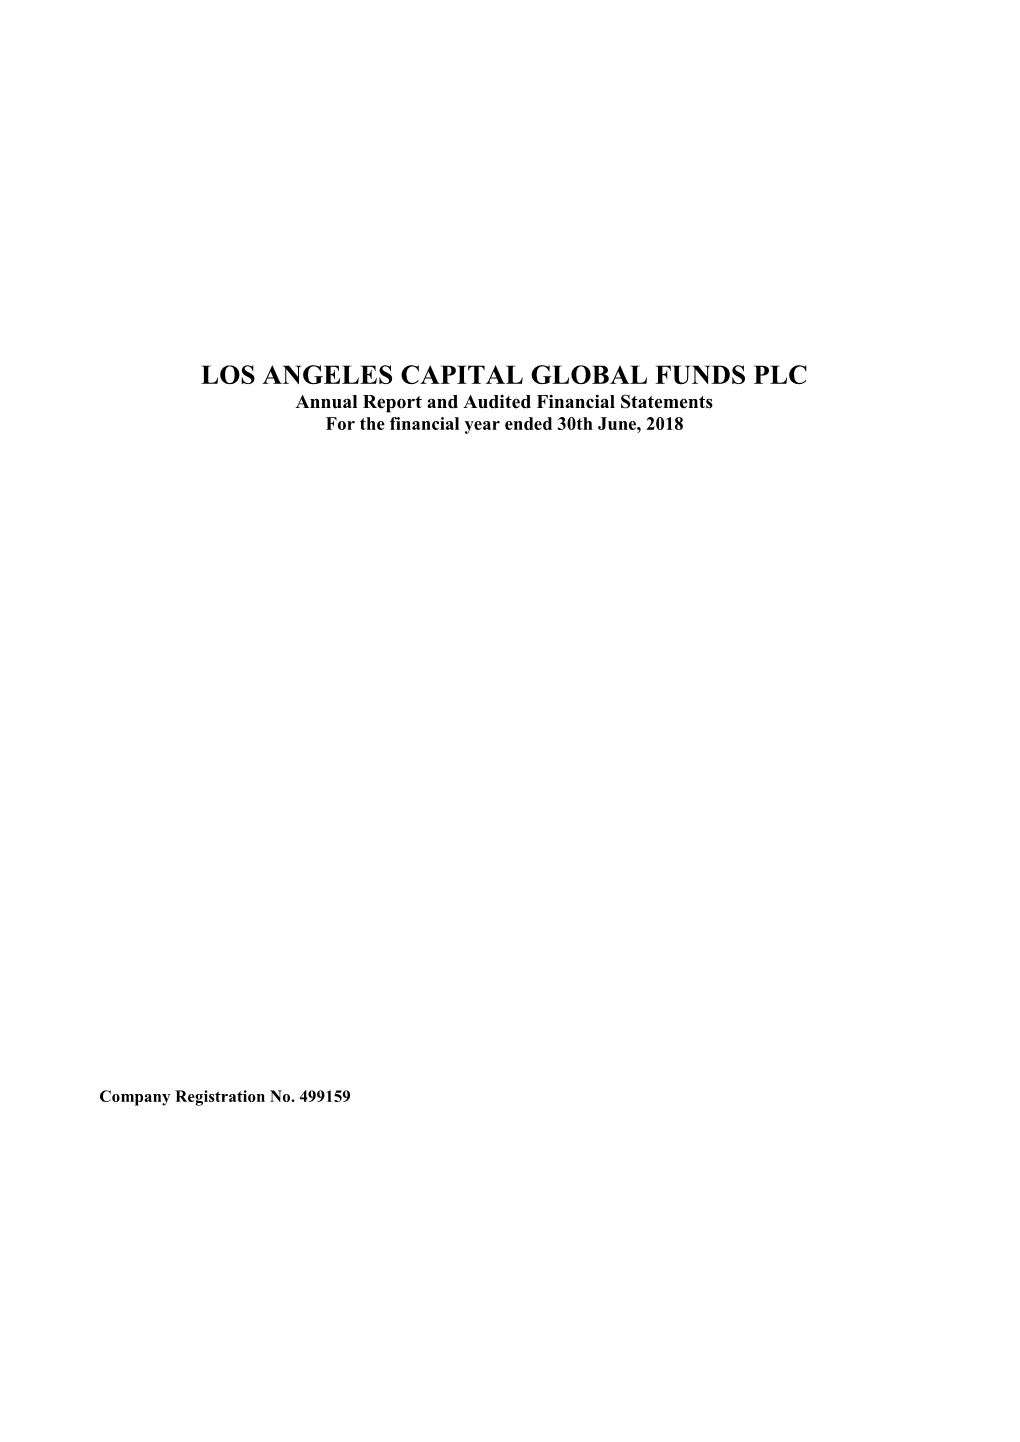 LOS ANGELES CAPITAL GLOBAL FUNDS PLC Annual Report and Audited Financial Statements for the Financial Year Ended 30Th June, 2018